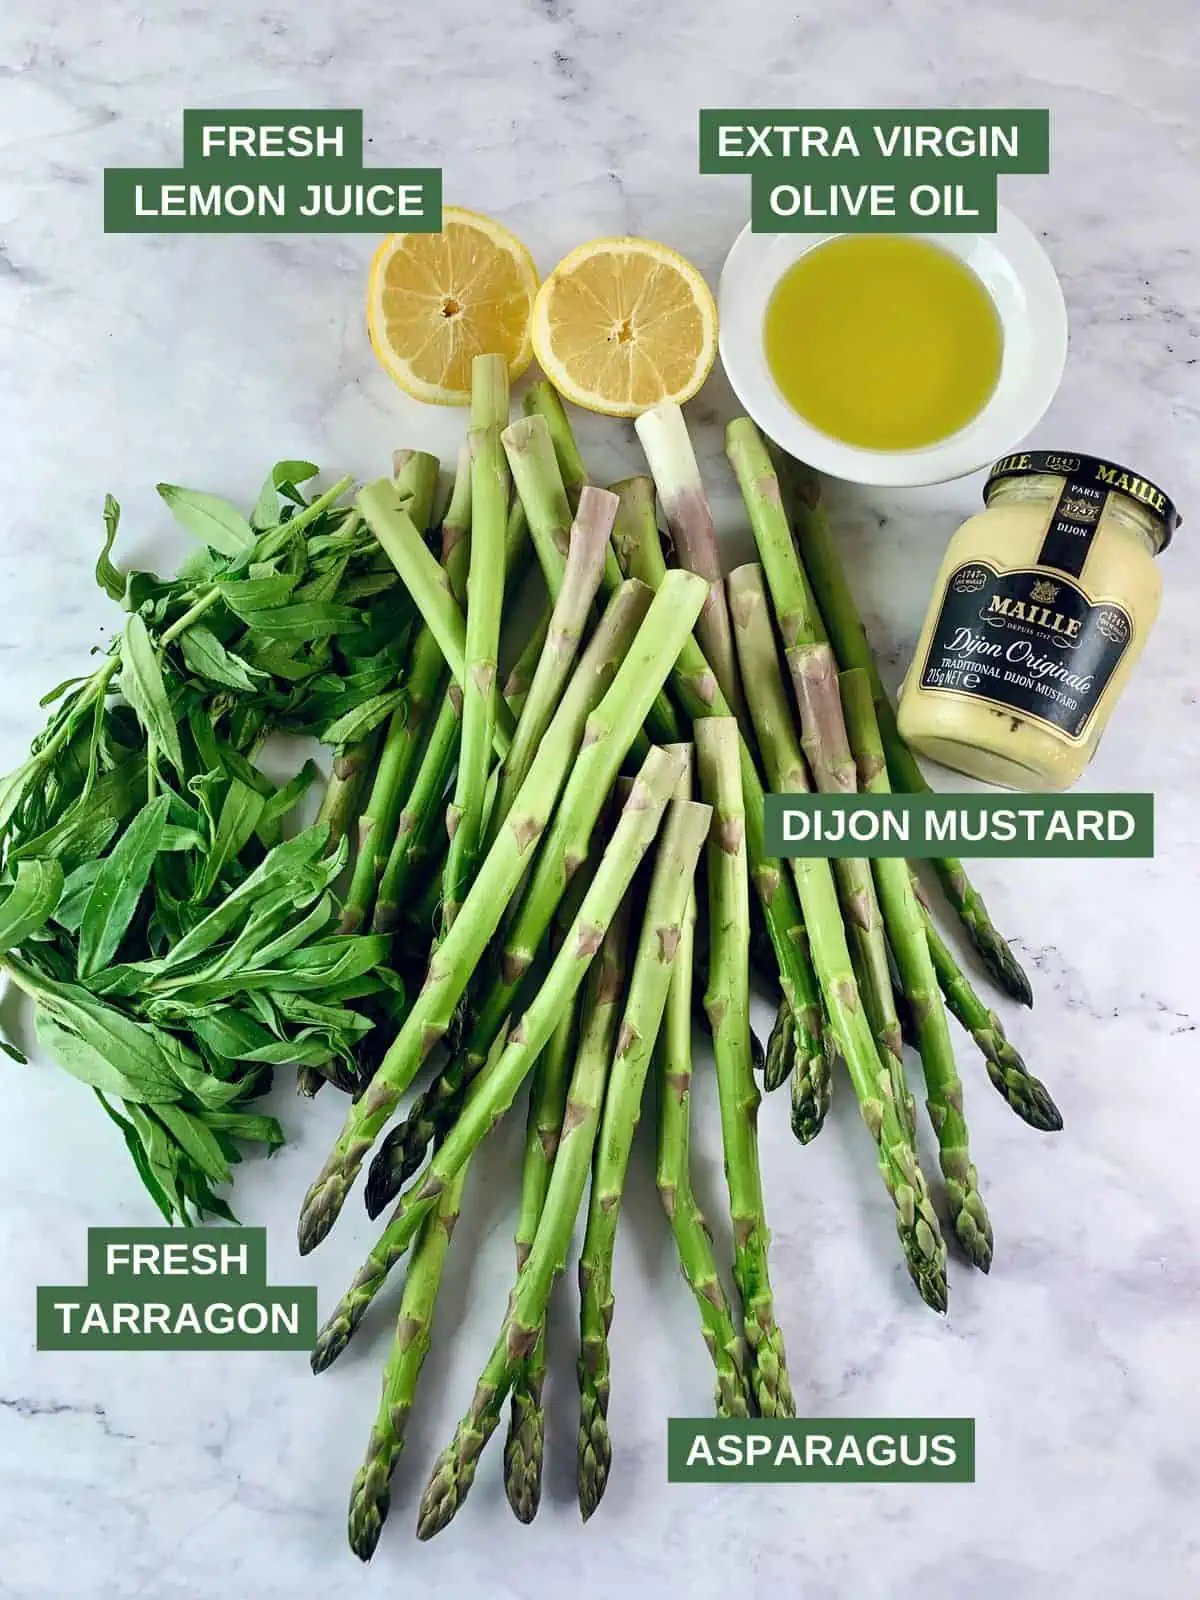 Labelled ingredients needed to make oven roasted asparagus.